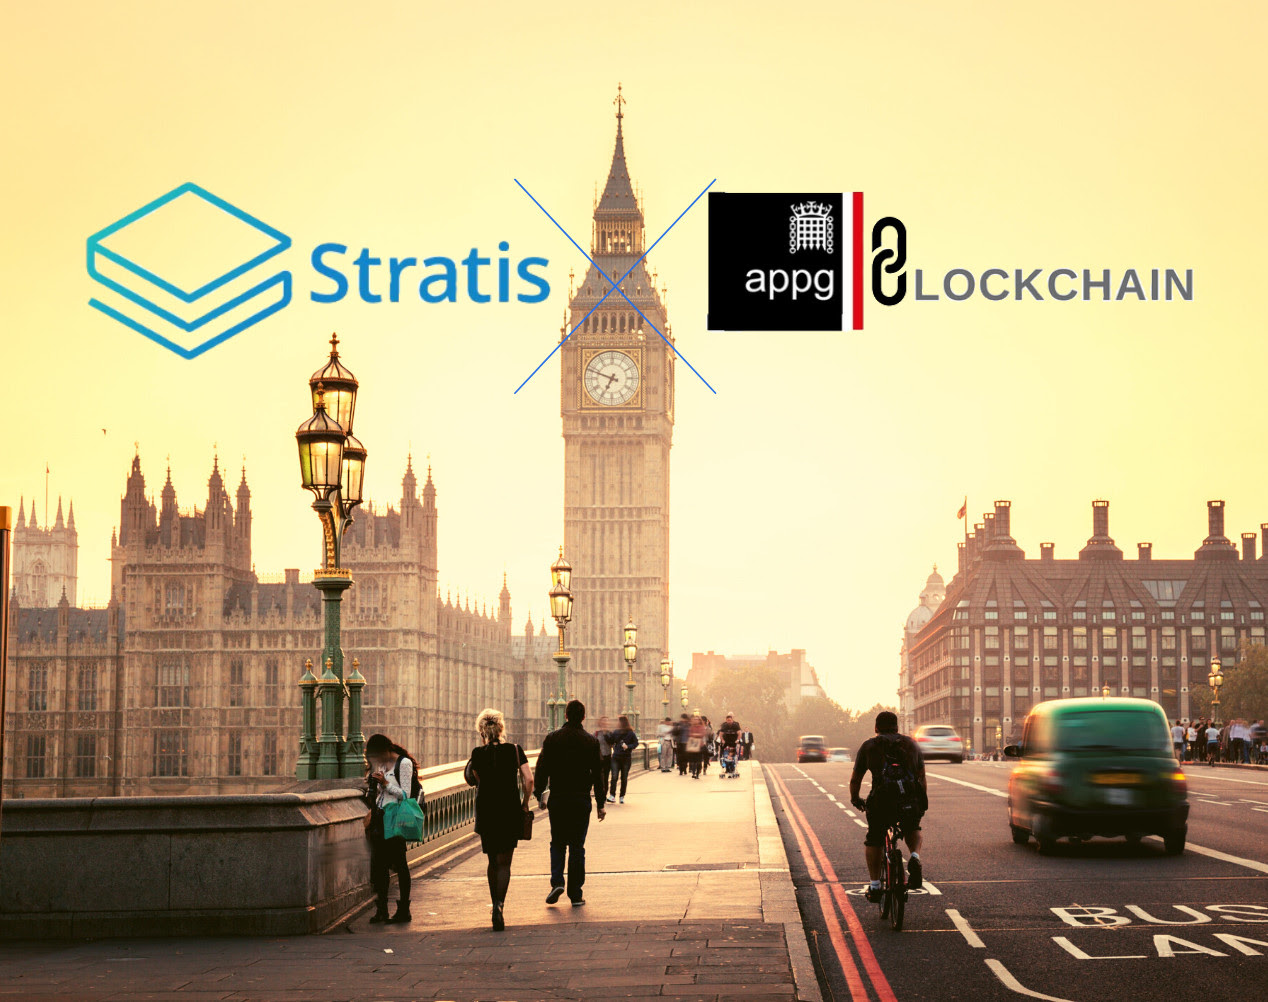 Stratis Joins 'APPG Blockchain' To Help Deploy Blockchain For Innovative Use-Cases